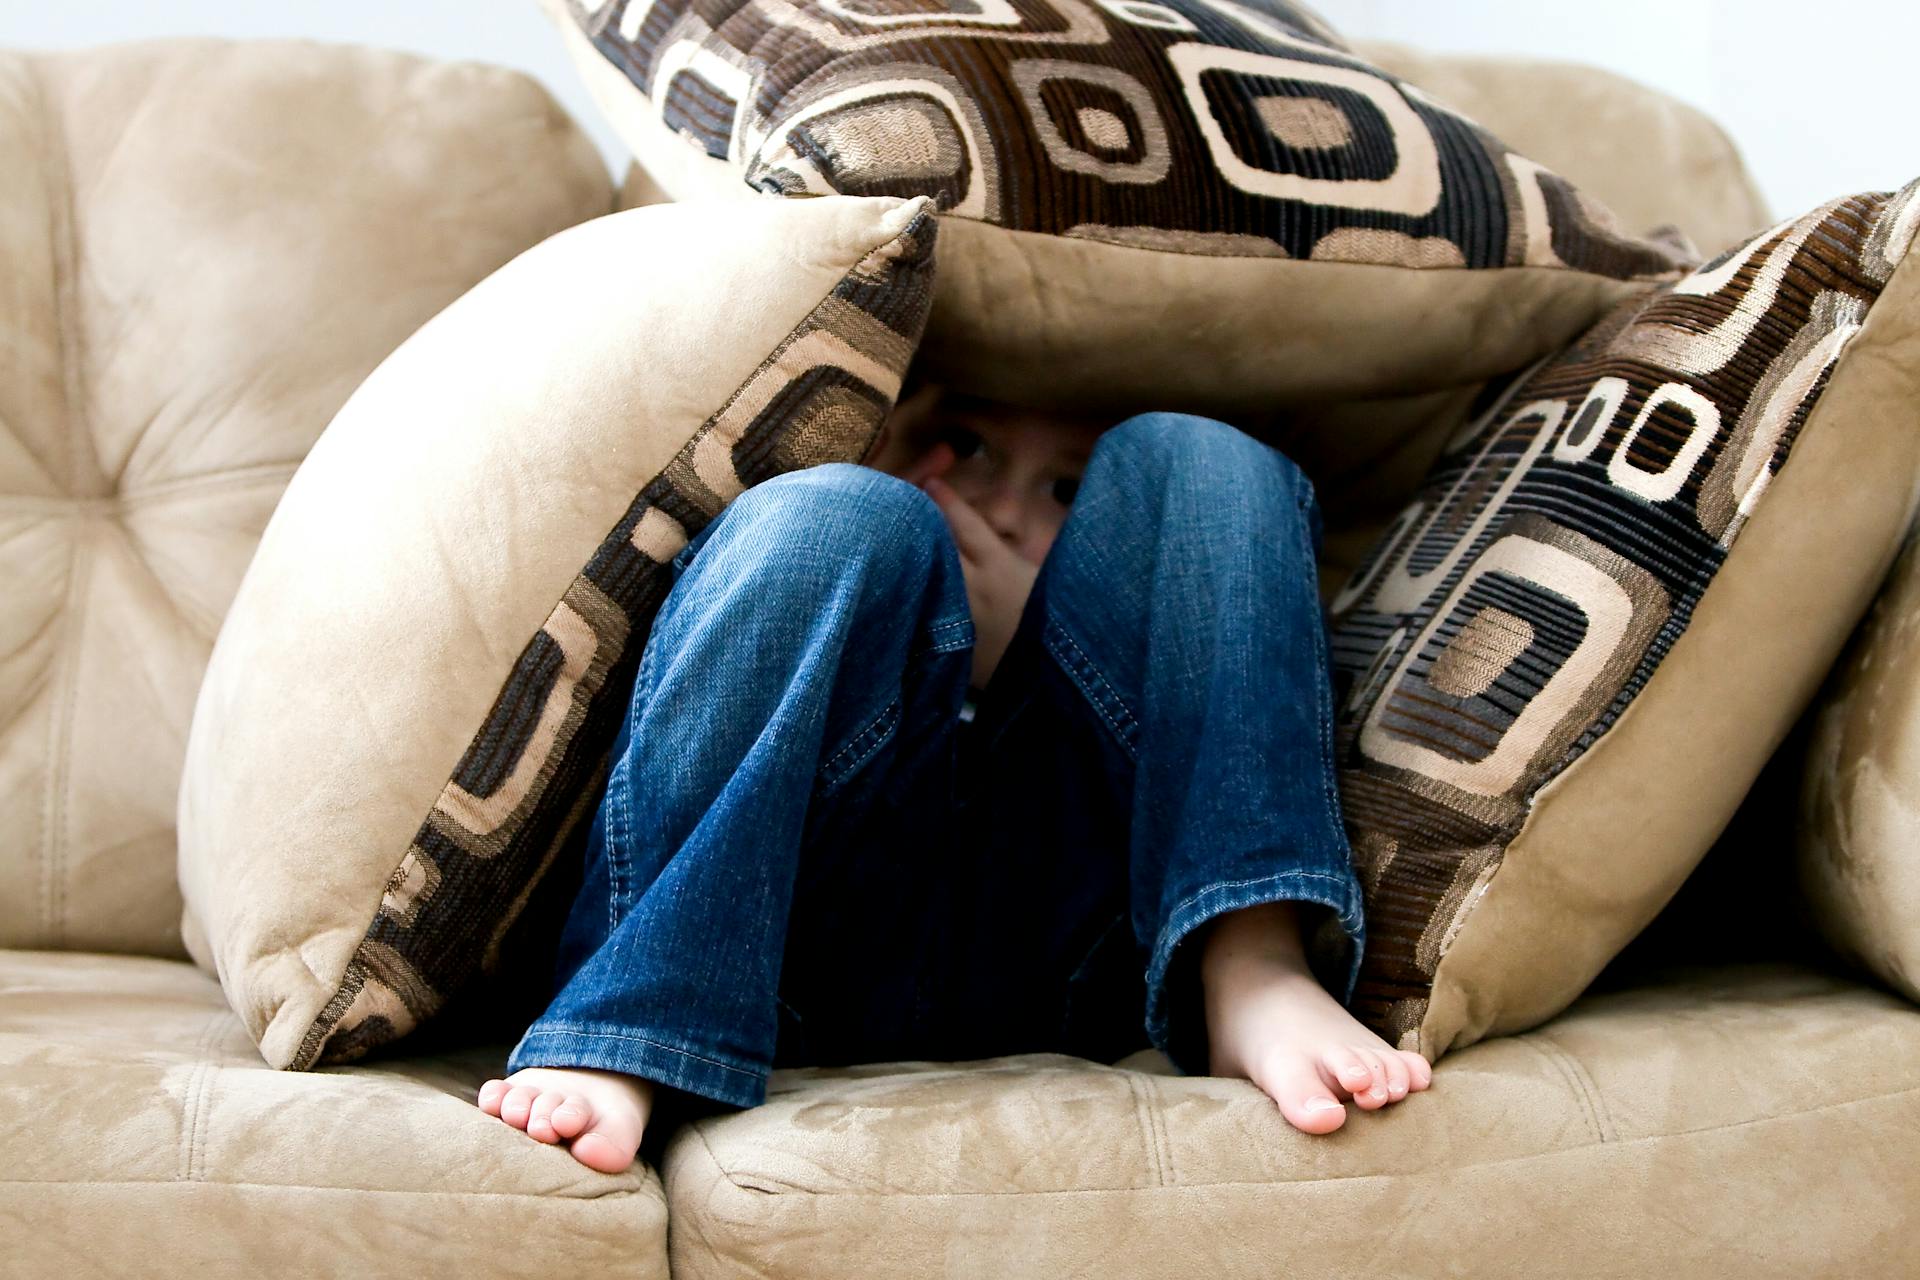 A boy hiding under a stack of pillows | Source: Pexels